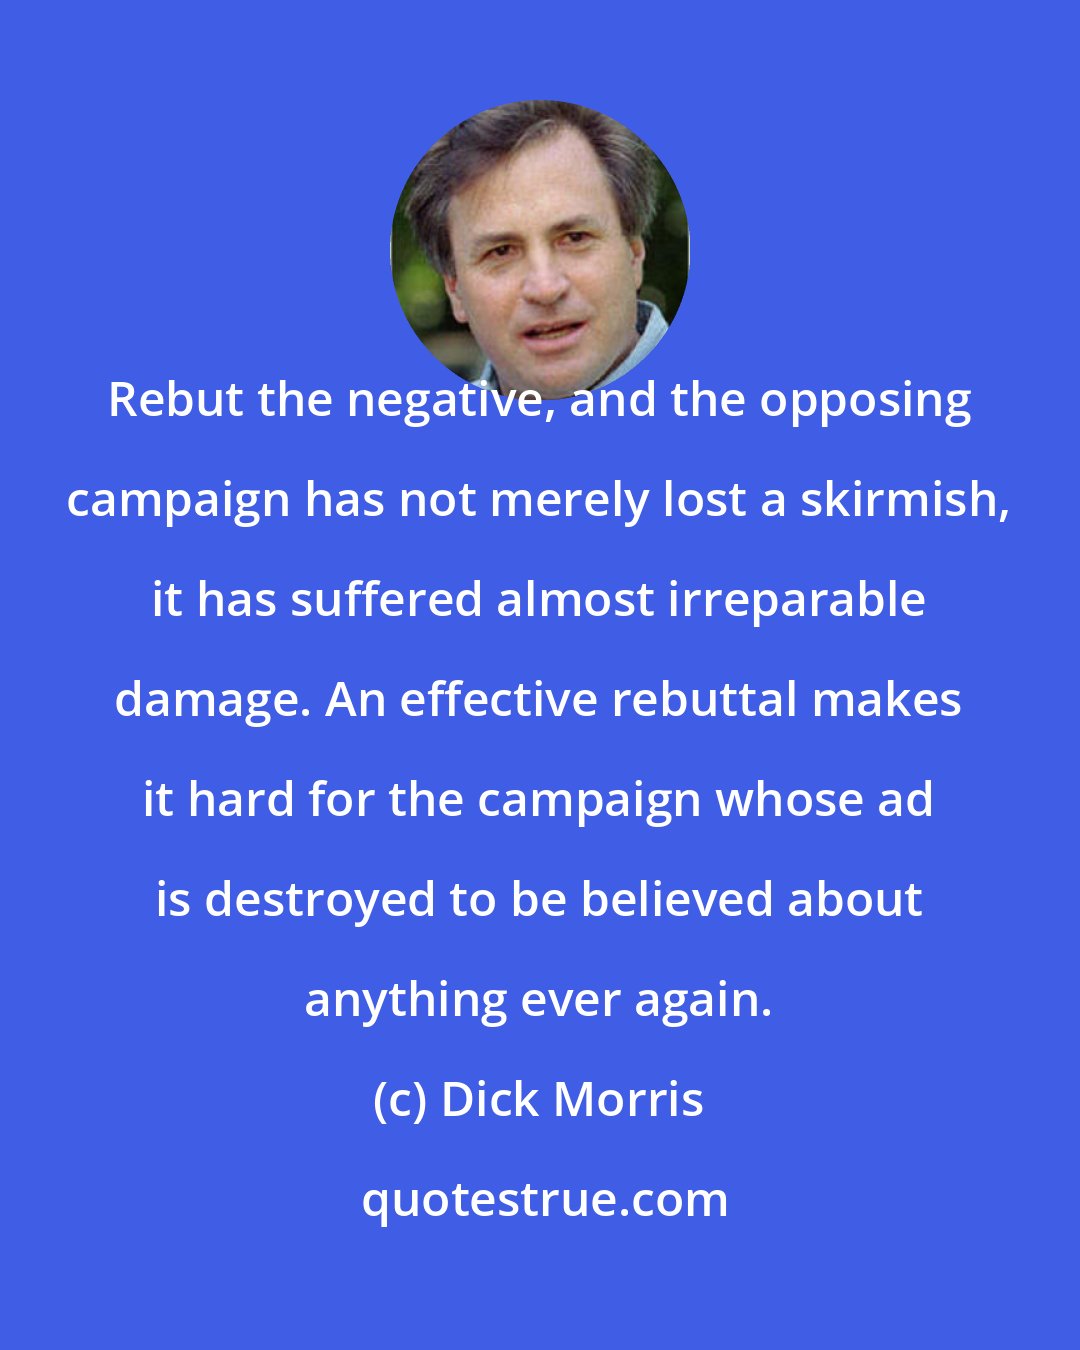 Dick Morris: Rebut the negative, and the opposing campaign has not merely lost a skirmish, it has suffered almost irreparable damage. An effective rebuttal makes it hard for the campaign whose ad is destroyed to be believed about anything ever again.